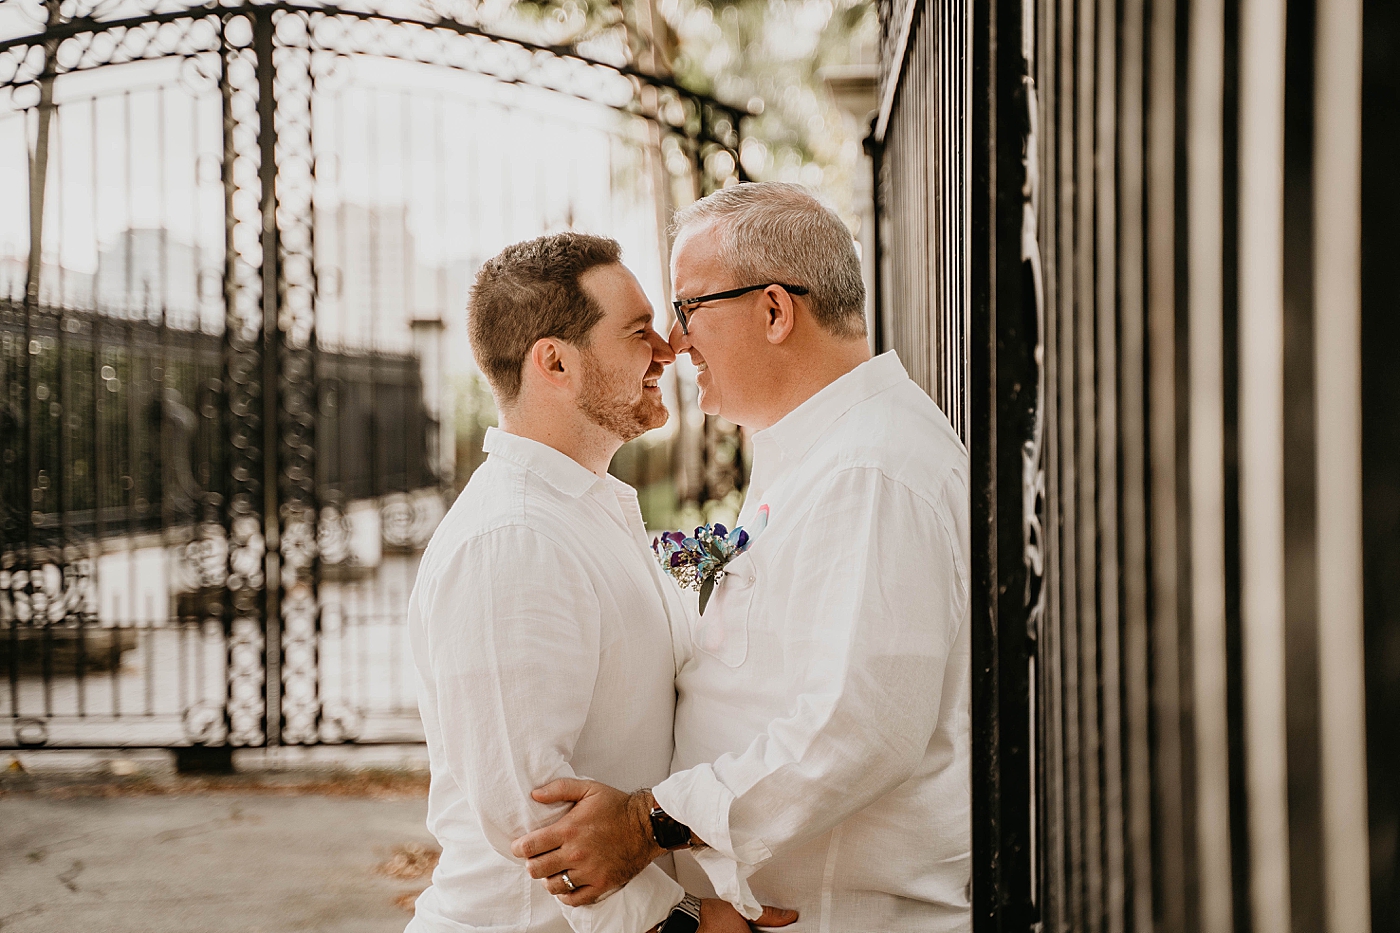 Couple nuzzling in front of gate Palm Beach Elopement Photography captured by South Florida Photographer Krystal Capone Photography 